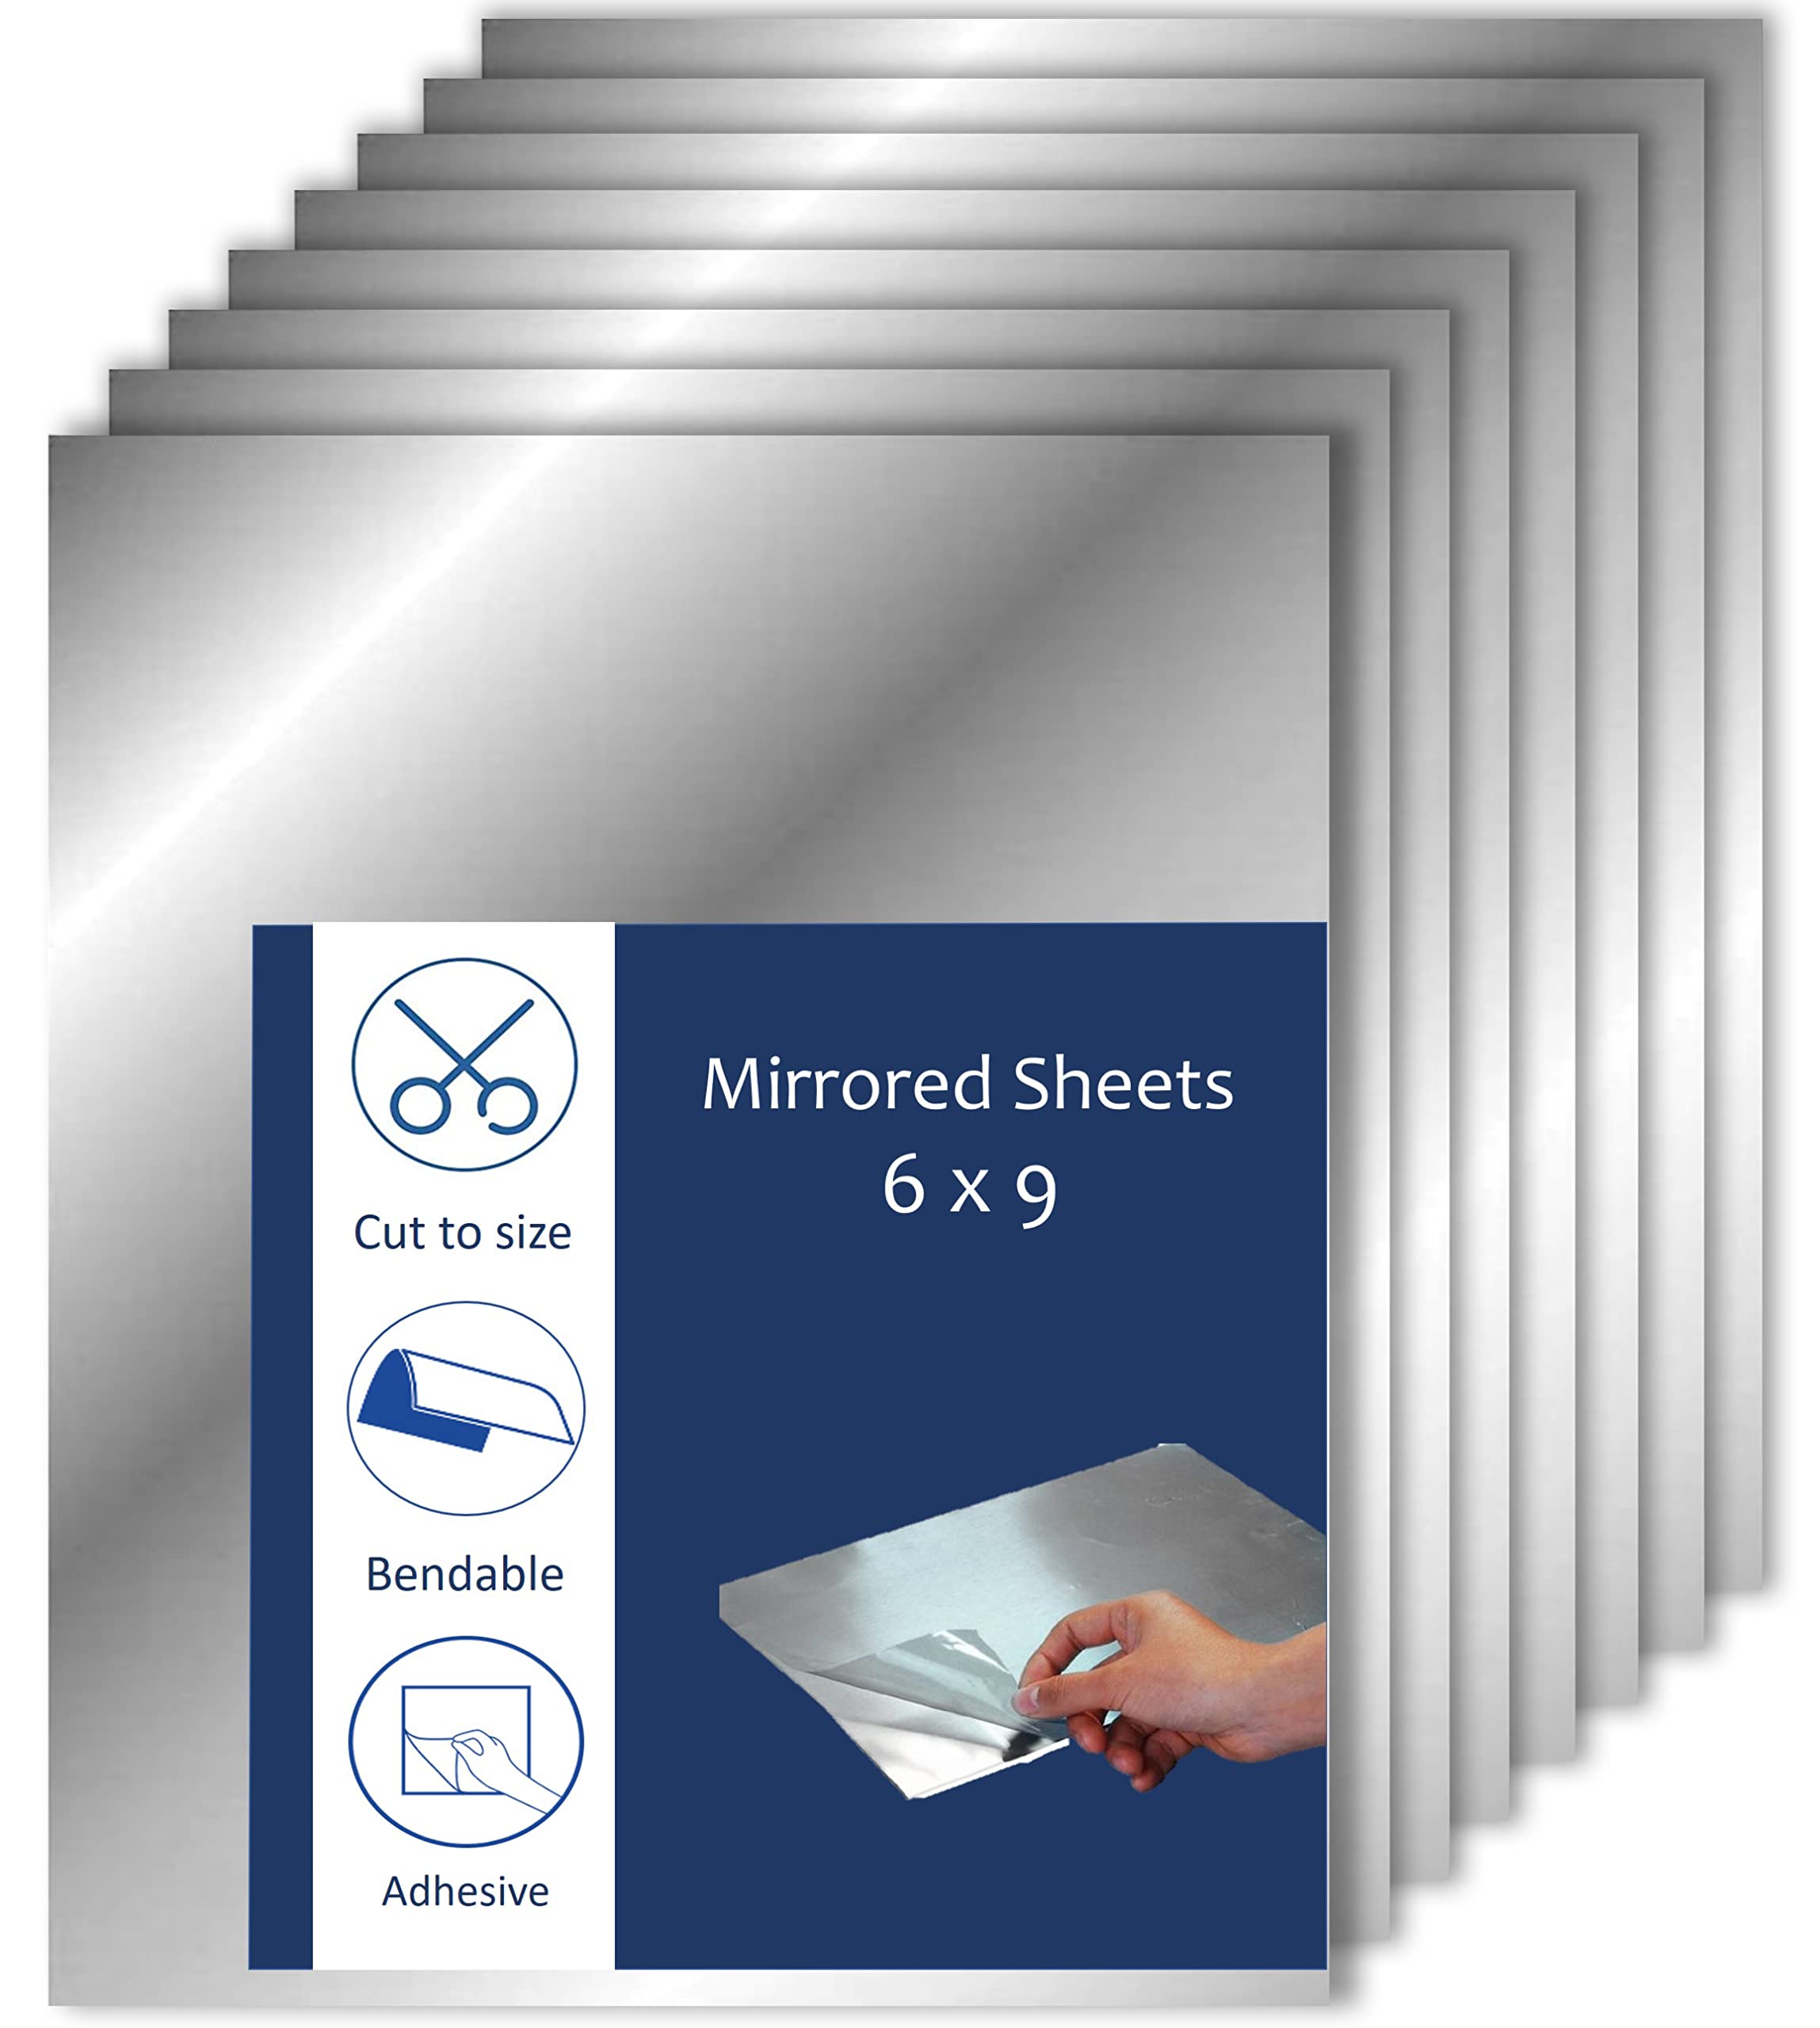 Adhesive Mirror Sheet 6 x 9 Inches Flexible Mirrors Sheets (8 Pack) | Non-Glass Self Adhesive Stick on Mirror Tiles | Cut Mirror Paper to Size, Peel and Stick, Great for Crafts and Mirror Wall  - Very Good